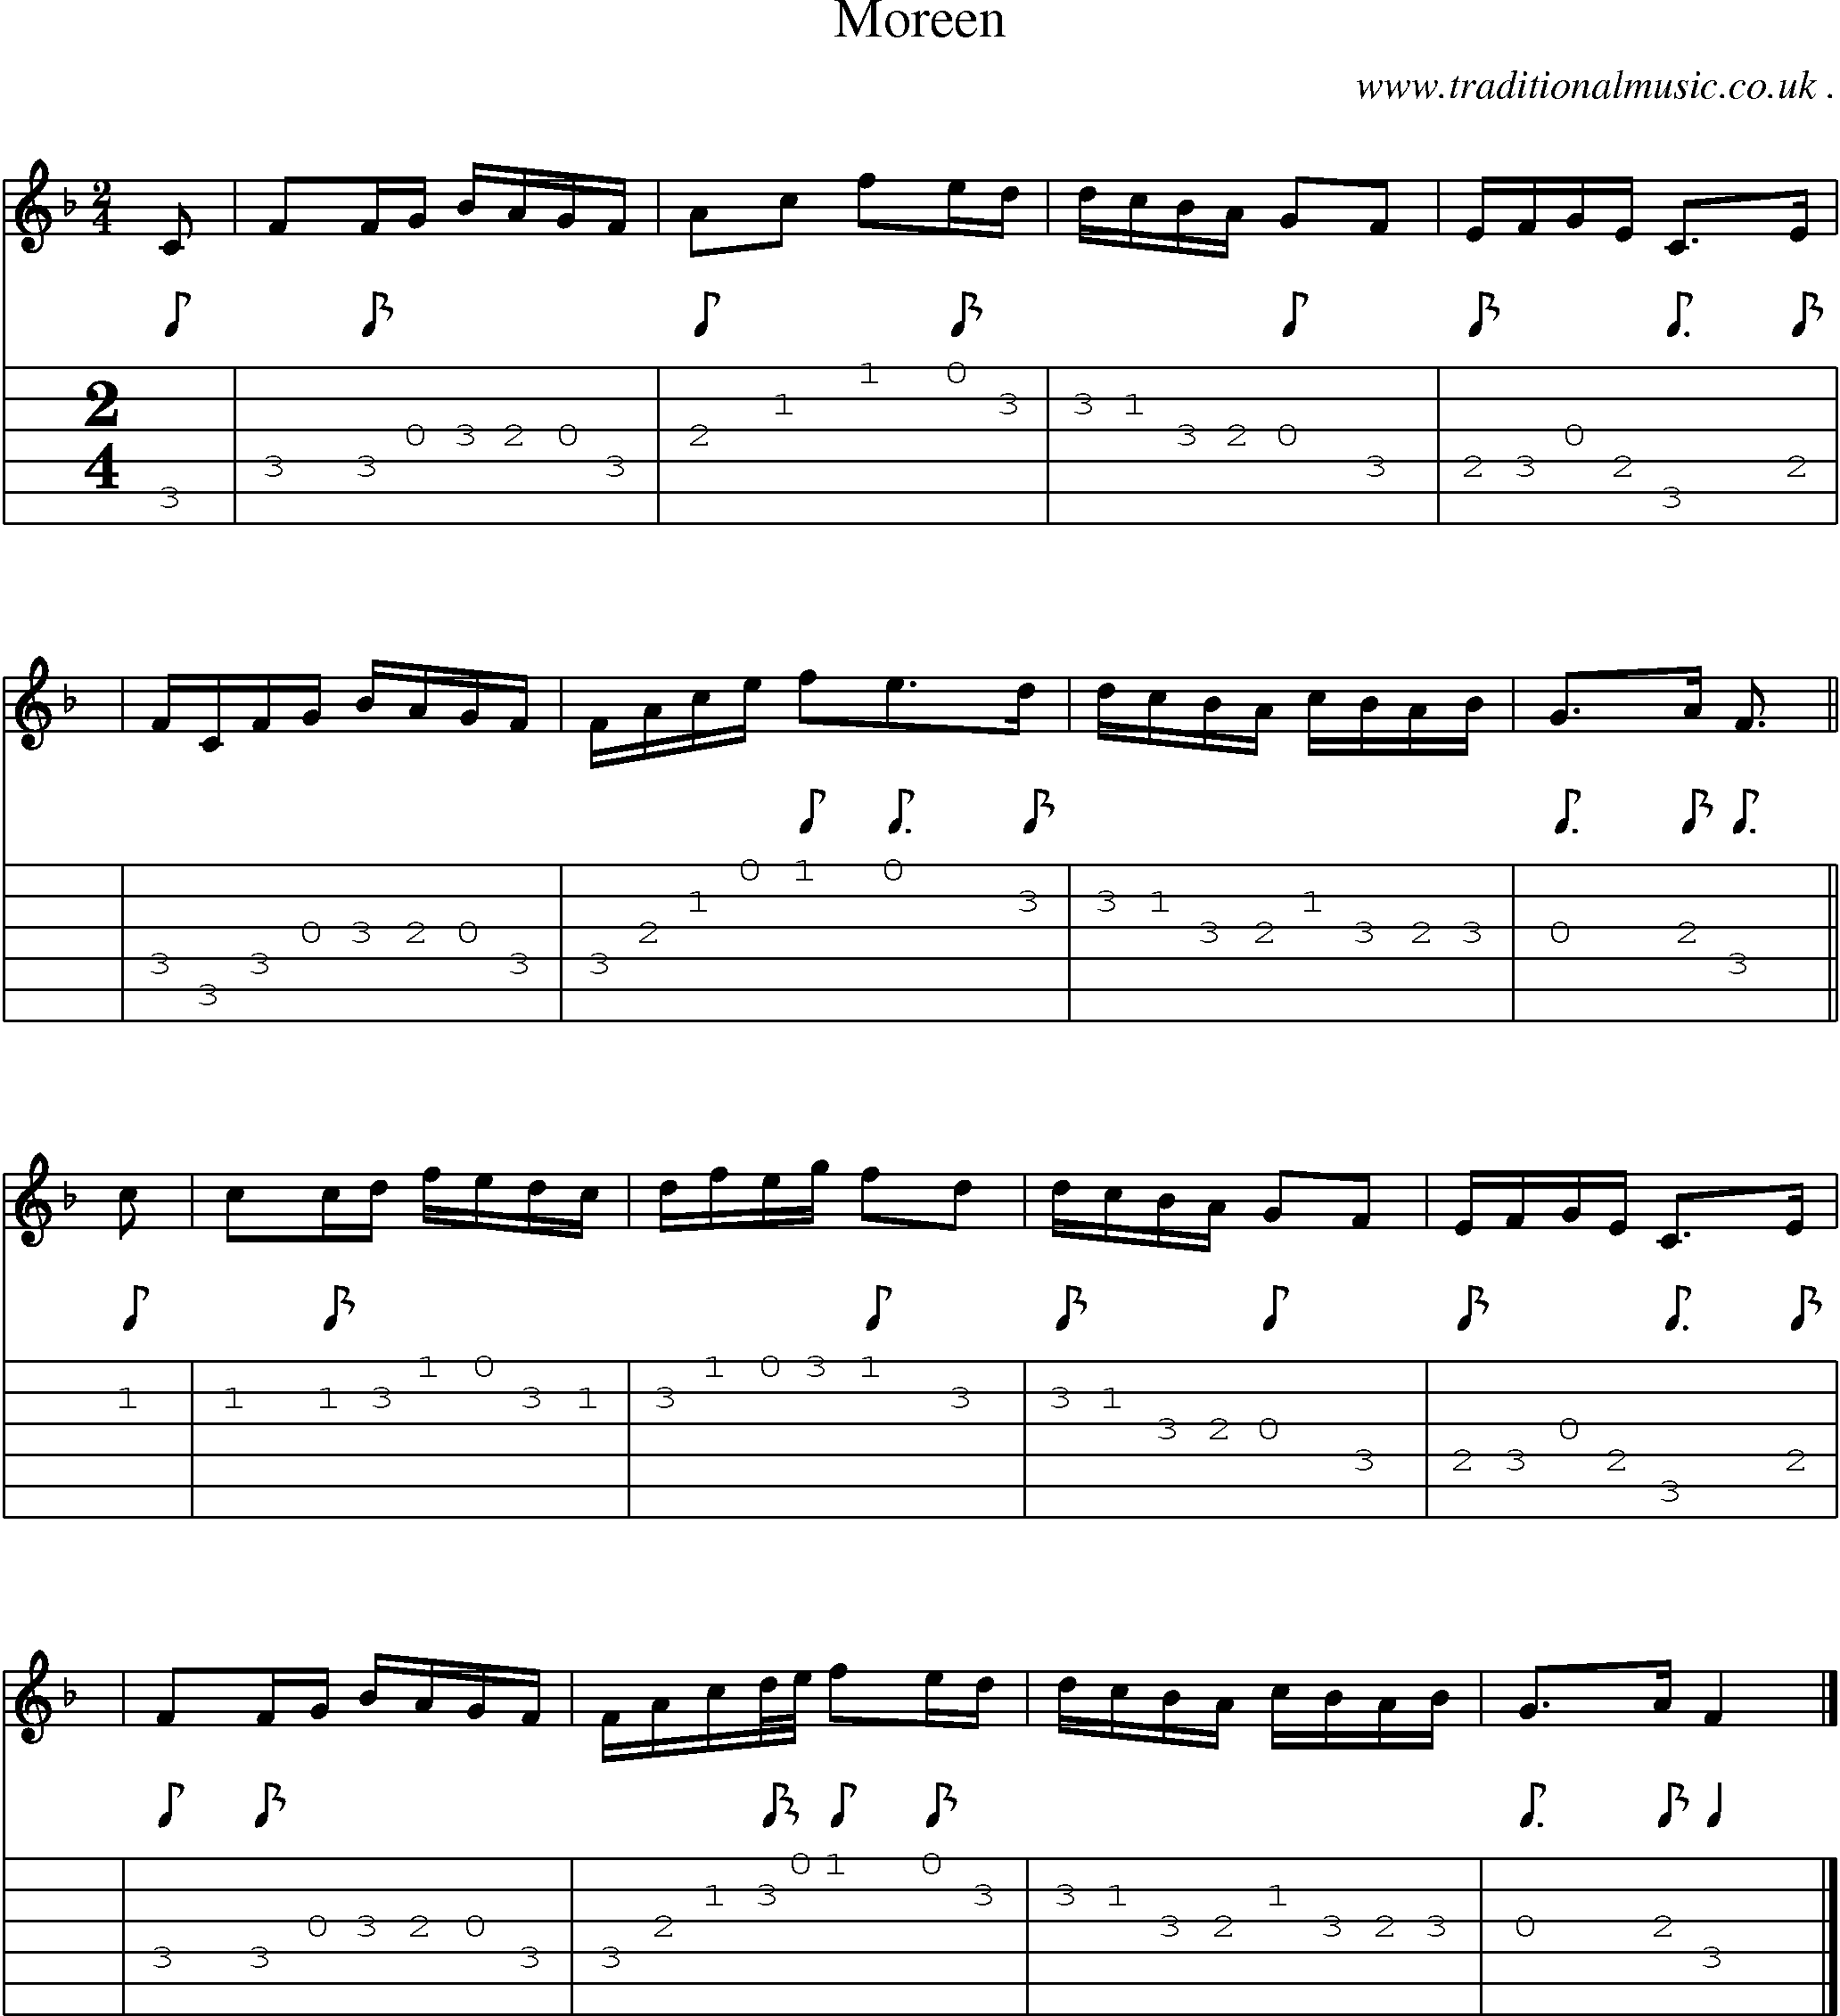 Sheet-music  score, Chords and Guitar Tabs for Moreen